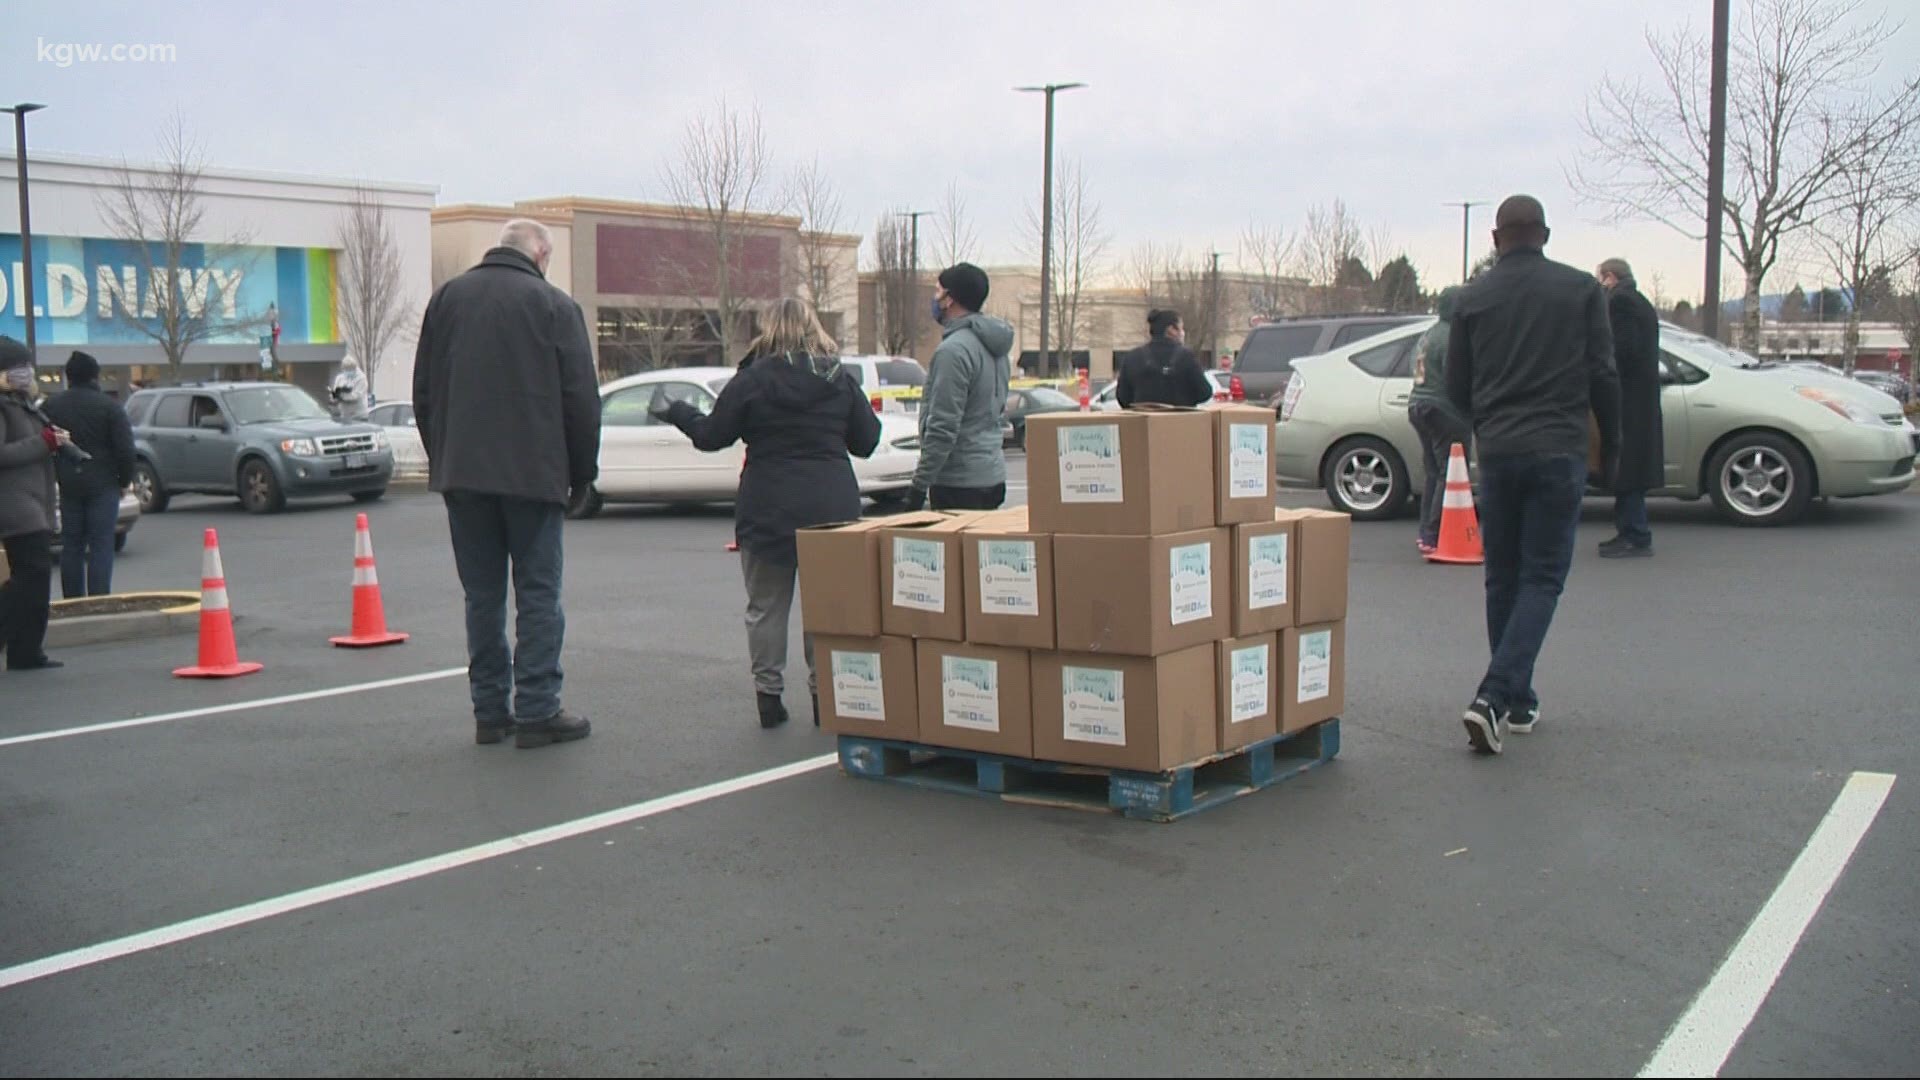 A $20,000 donation from Jordan Schnitzer to SnowCap Community Charities helped put food on the table for hundreds of families in East Multnomah County.